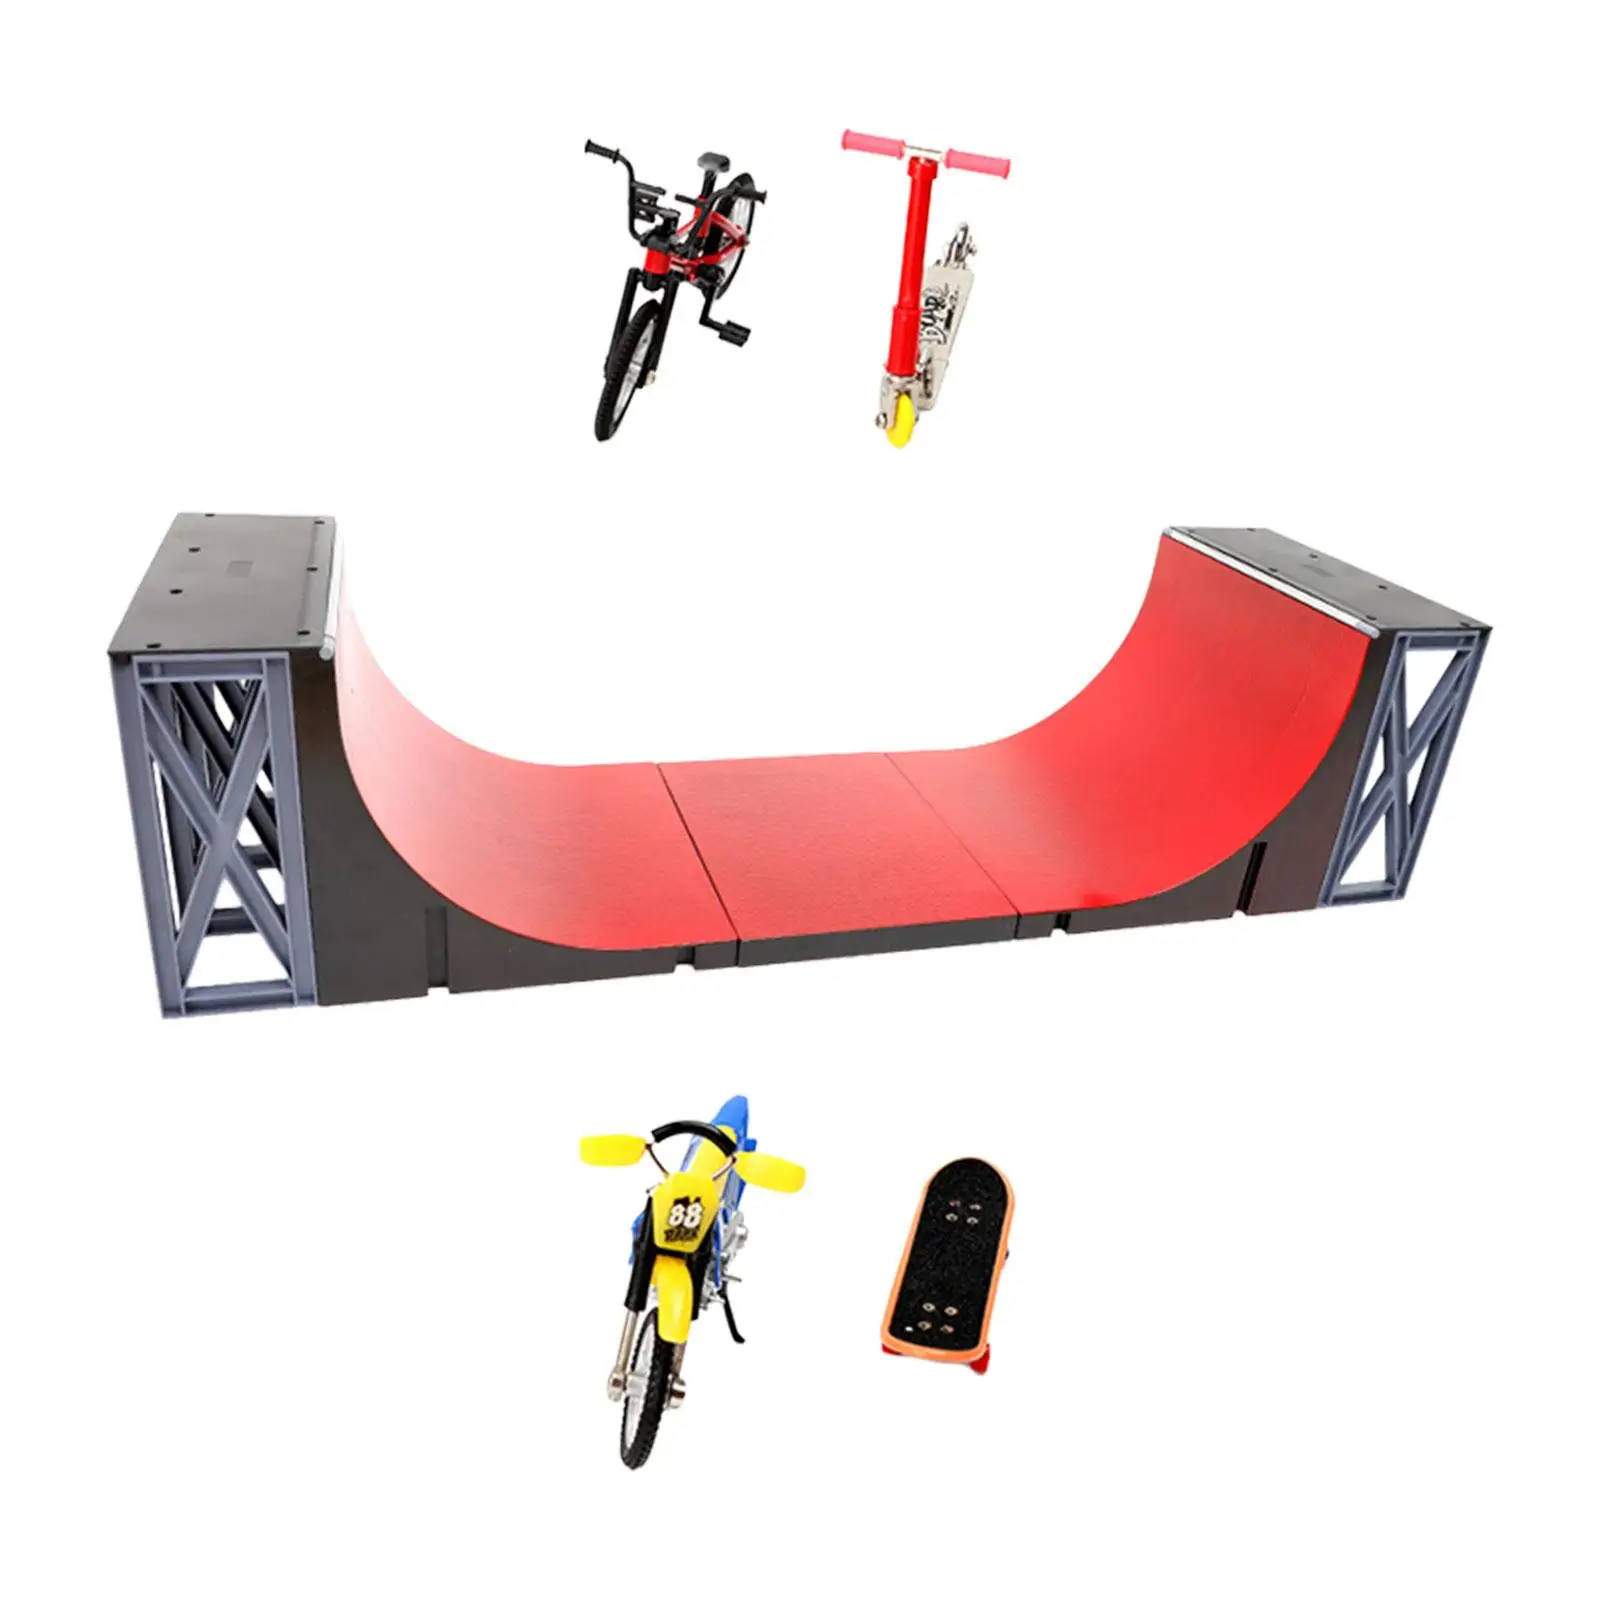 5 Pieces Fingerboard Skate Ramps, Early Educational Party Favors, Fingerboard Ramp Finger Set